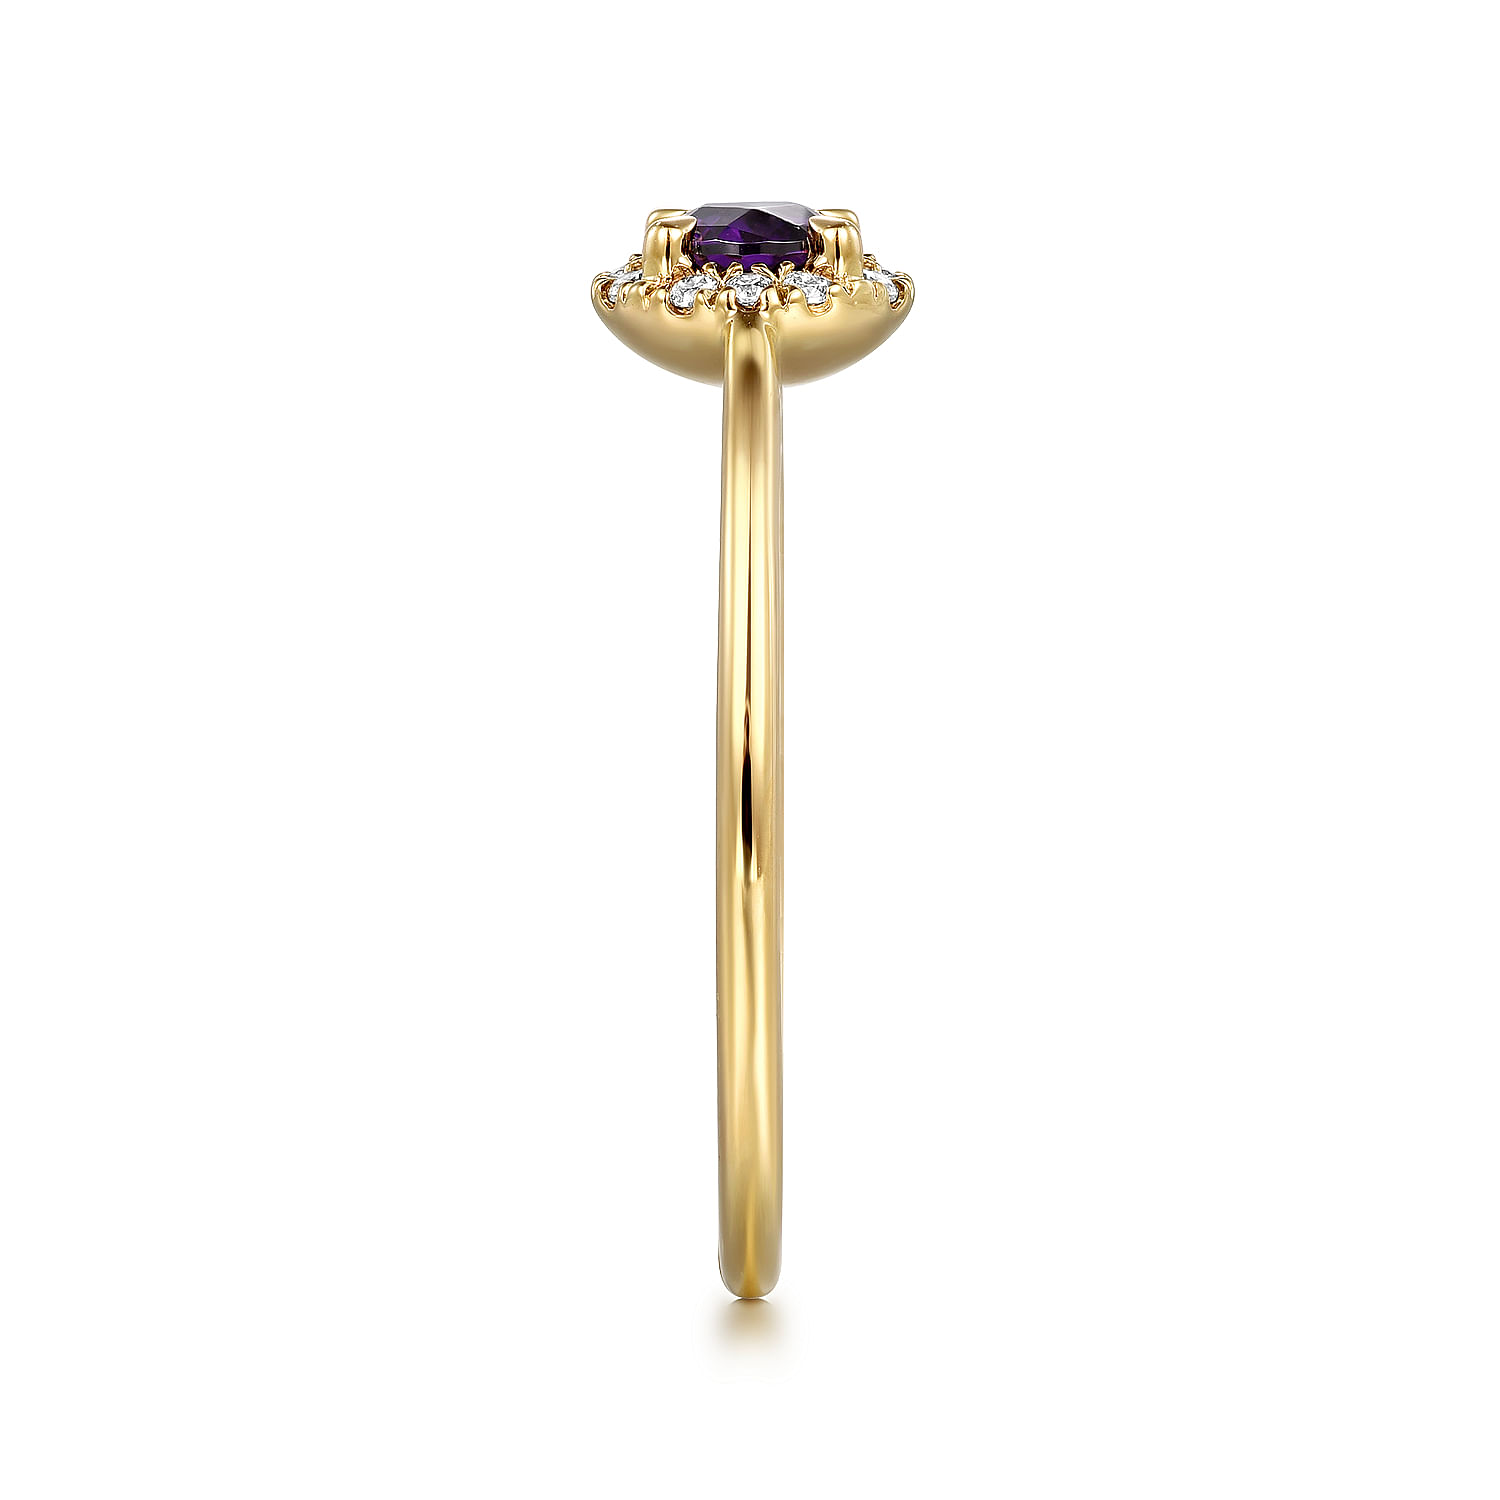 14K Yellow Gold Amethyst and Diamond Halo Promise Ring